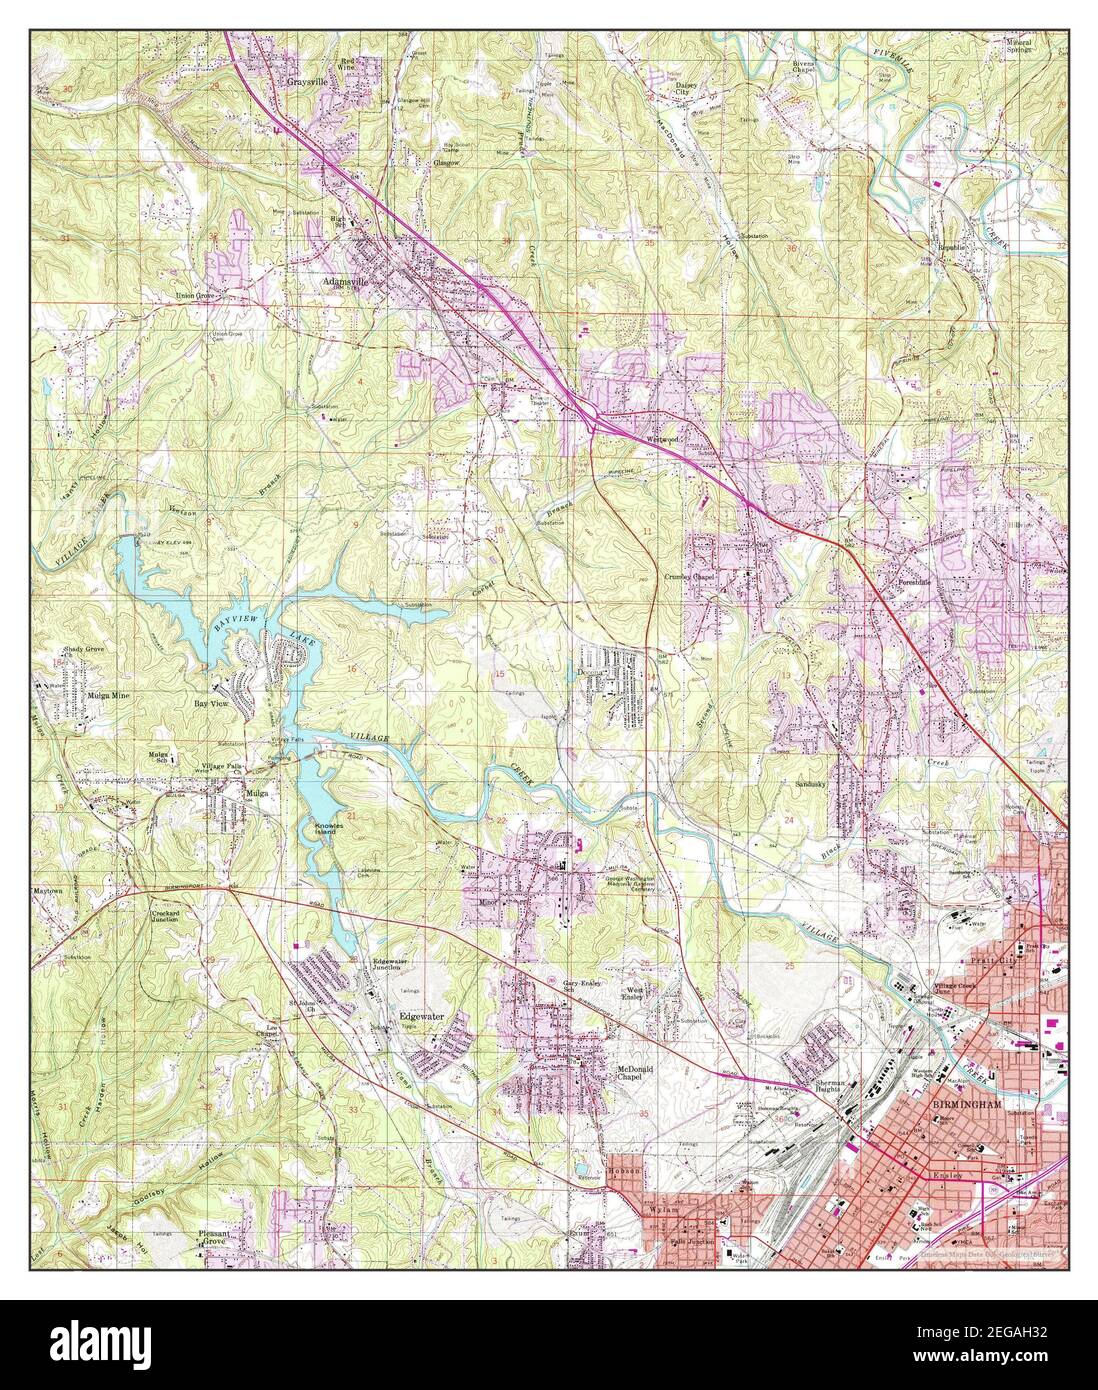 Adamsville, Alabama, map 1993, 1:24000, United States of America by Timeless Maps, data U.S. Geological Survey Stock Photo